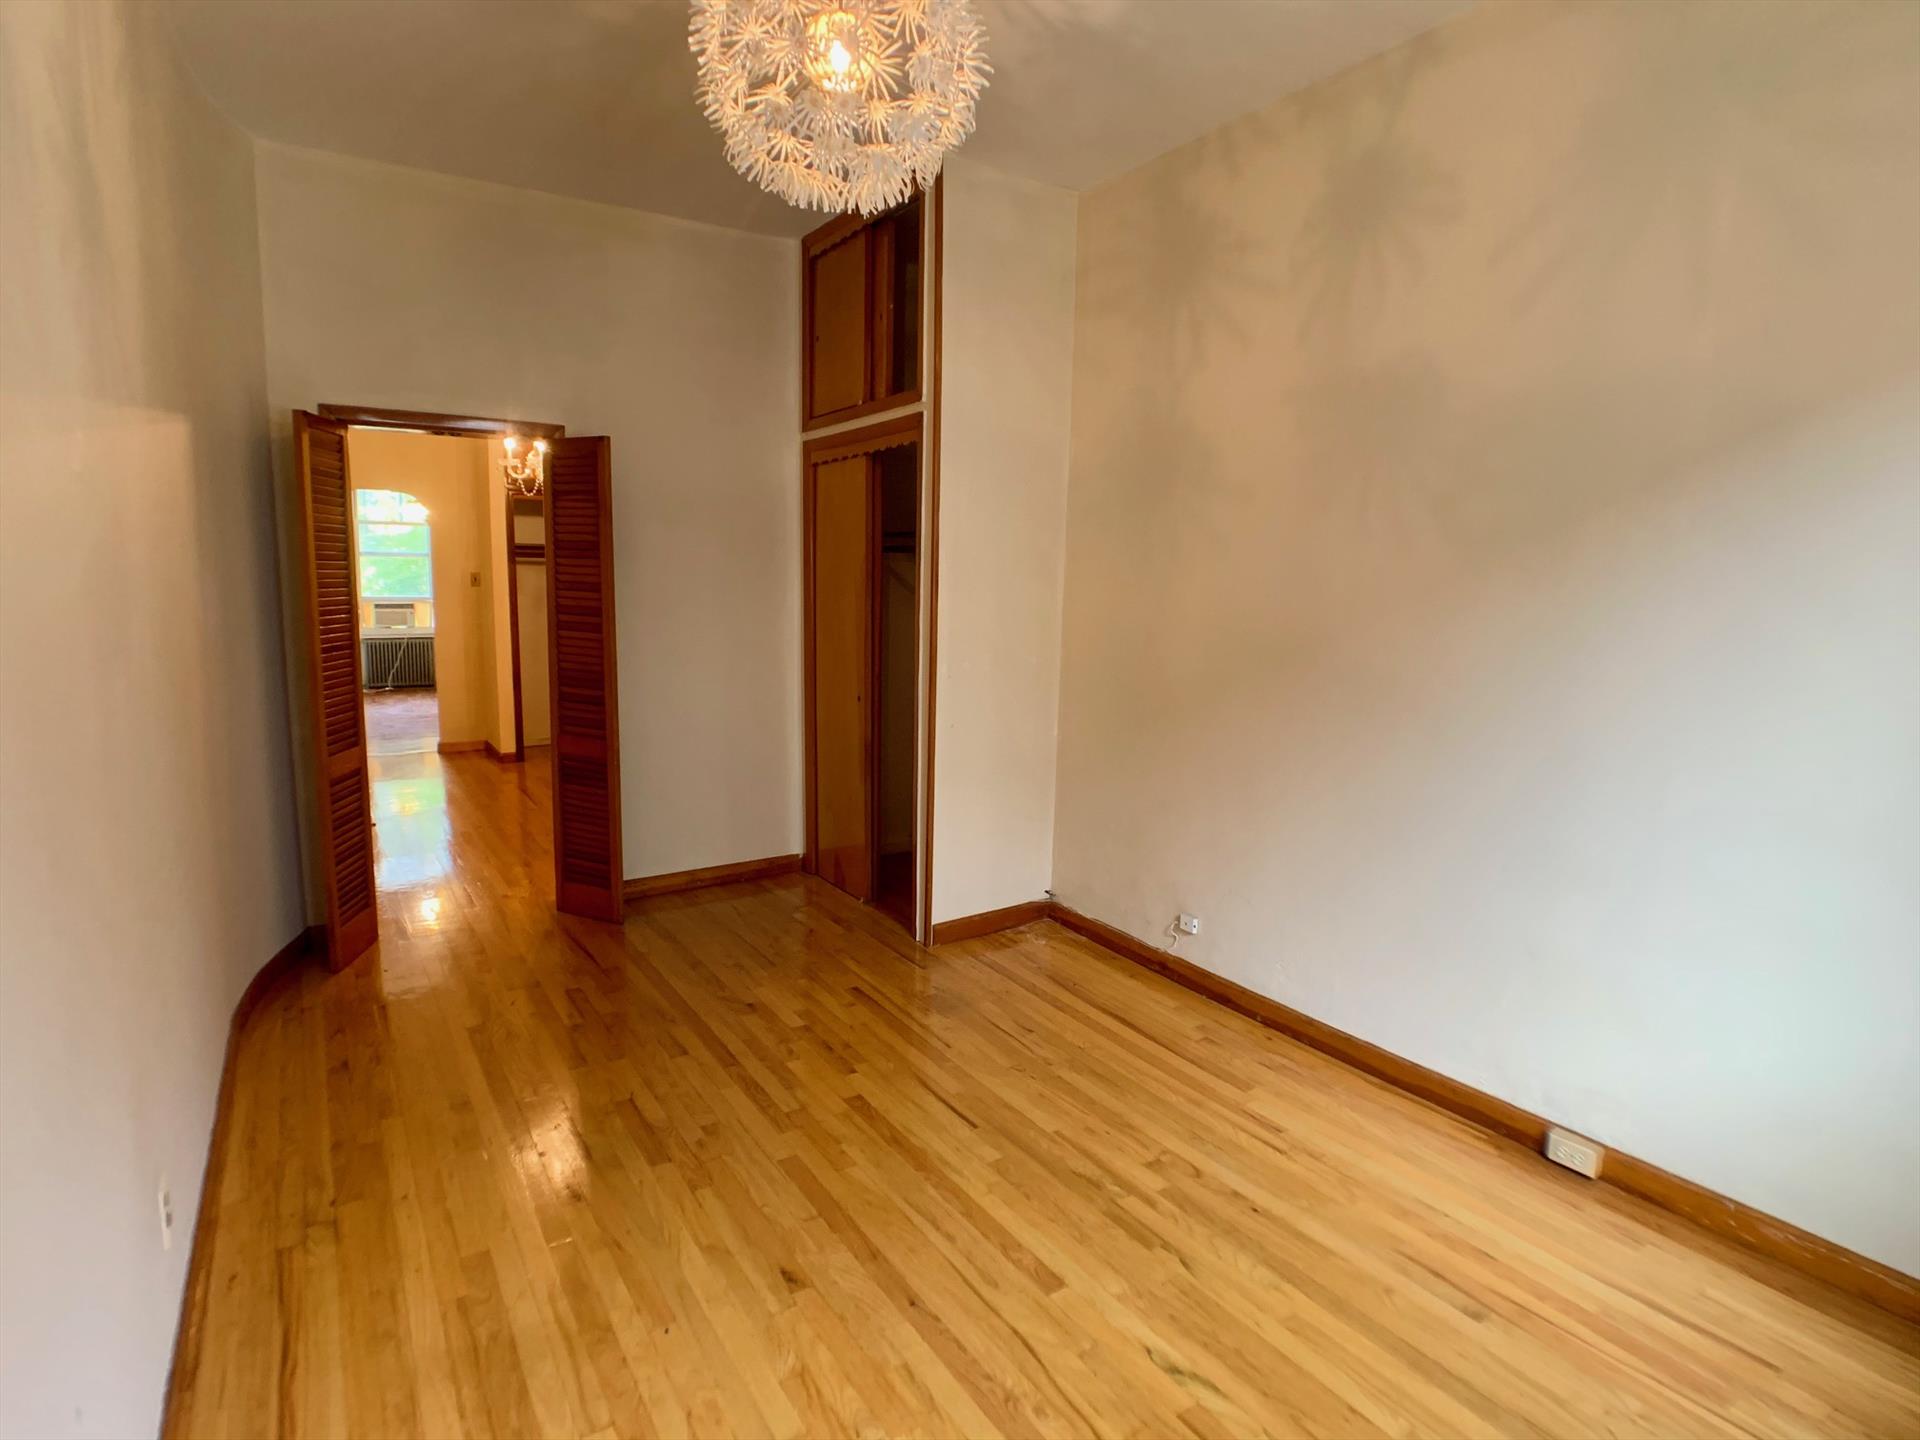 AVAILABLE 11/1 - Move in date is non negotiable. One bedroom apartment! Railroad style, hardwood floors, heat and hot water included, Laundry in the building. Close to all shopping, nightlife, mass transit, restaurants, schools, parks and more! 